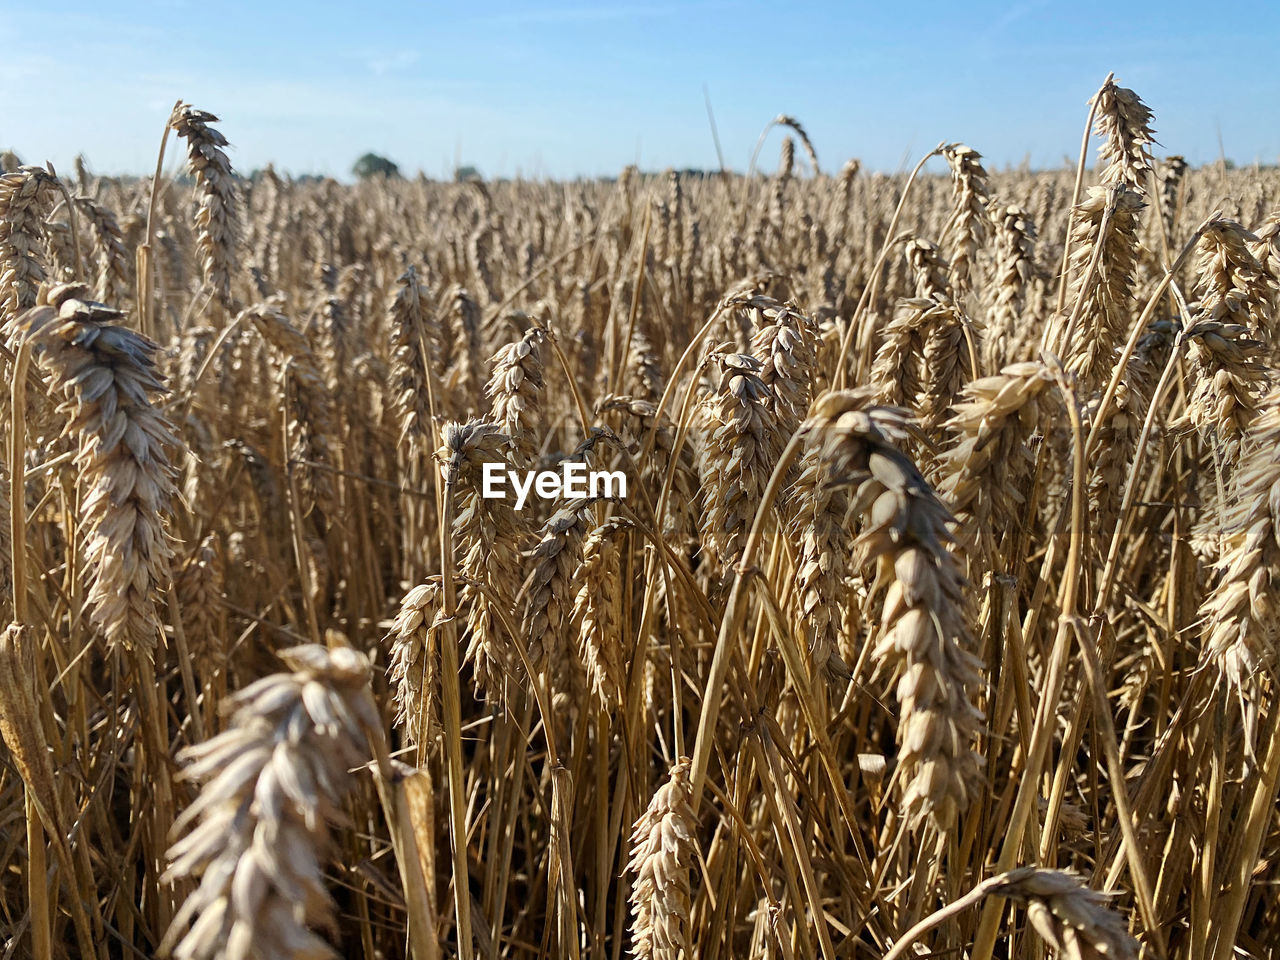 crop, agriculture, cereal plant, landscape, food, field, land, plant, rural scene, sky, growth, nature, farm, wheat, environment, food grain, corn, no people, summer, food and drink, beauty in nature, day, outdoors, barley, rye, cereal, gold, scenics - nature, harvesting, emmer, plant stem, sunlight, ripe, tranquility, close-up, cloud, blue